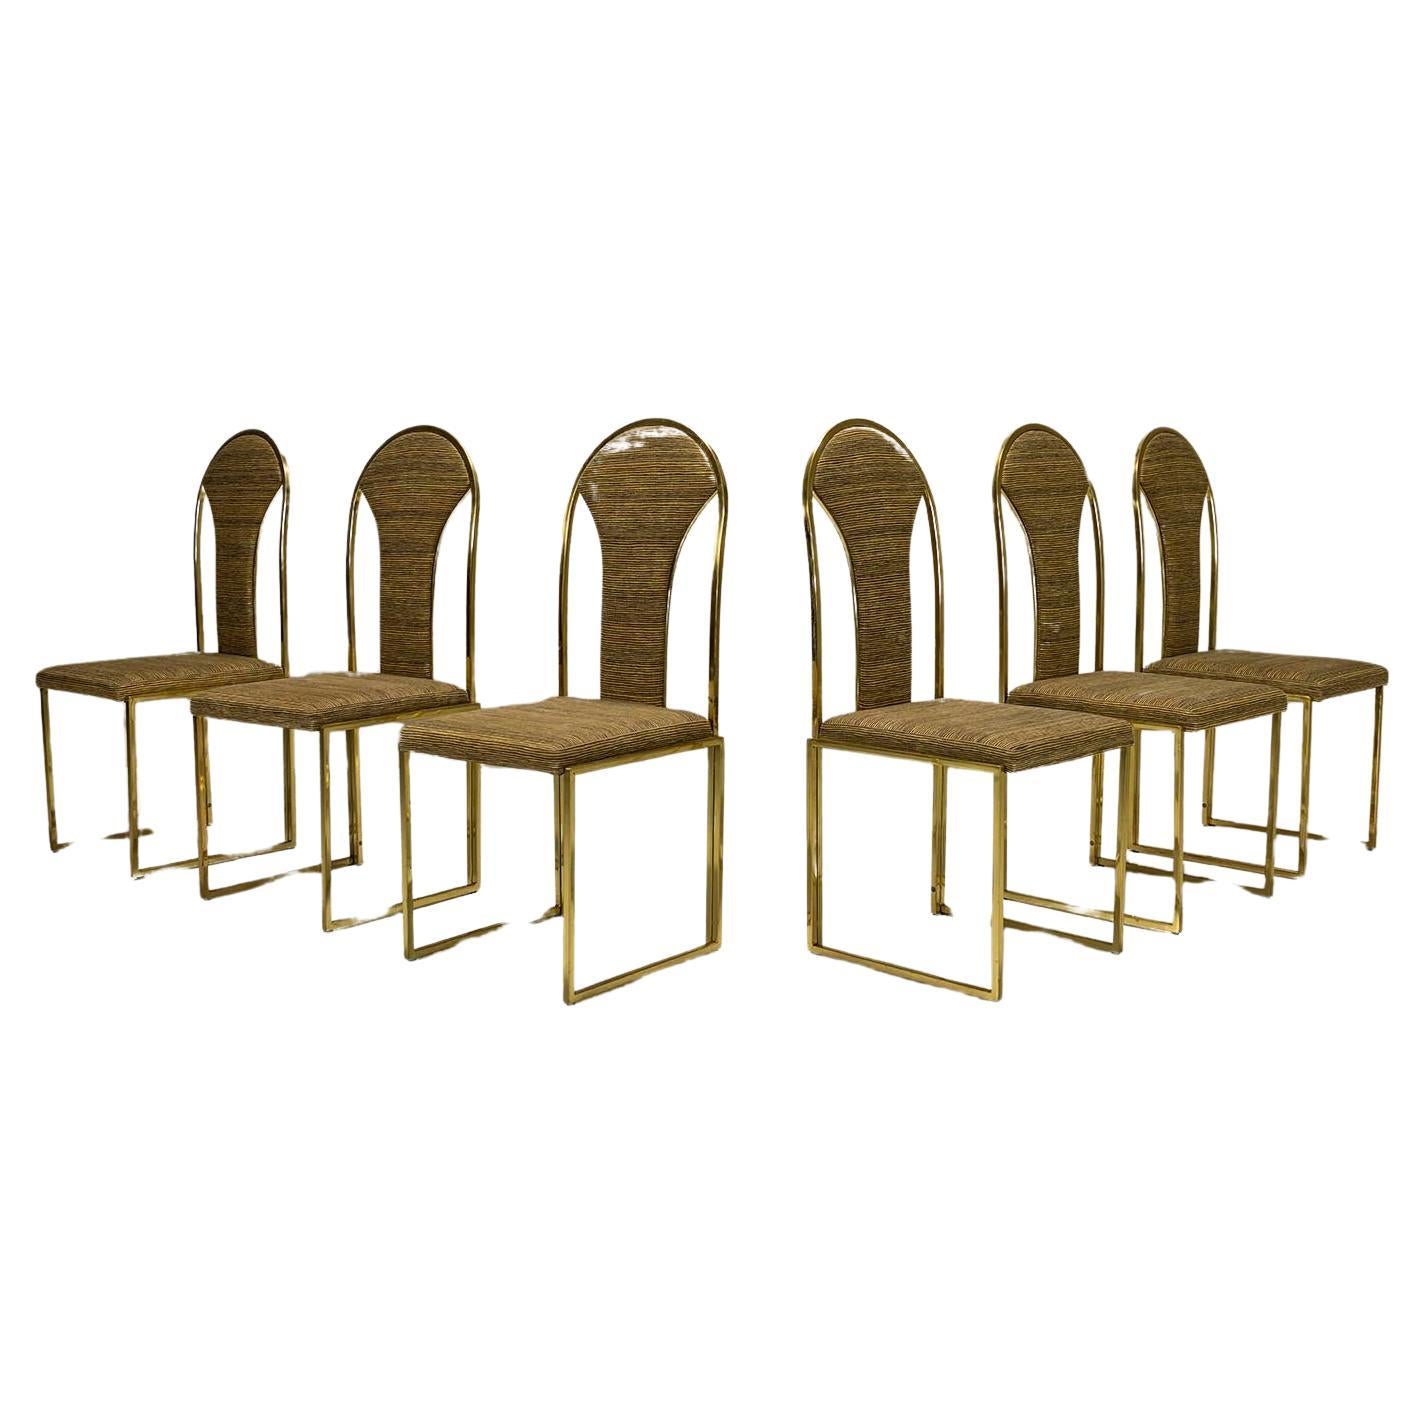 Six Hollywood Regency Dining Chairs Manufactured By Belgo Chrom, Belgium 1970's